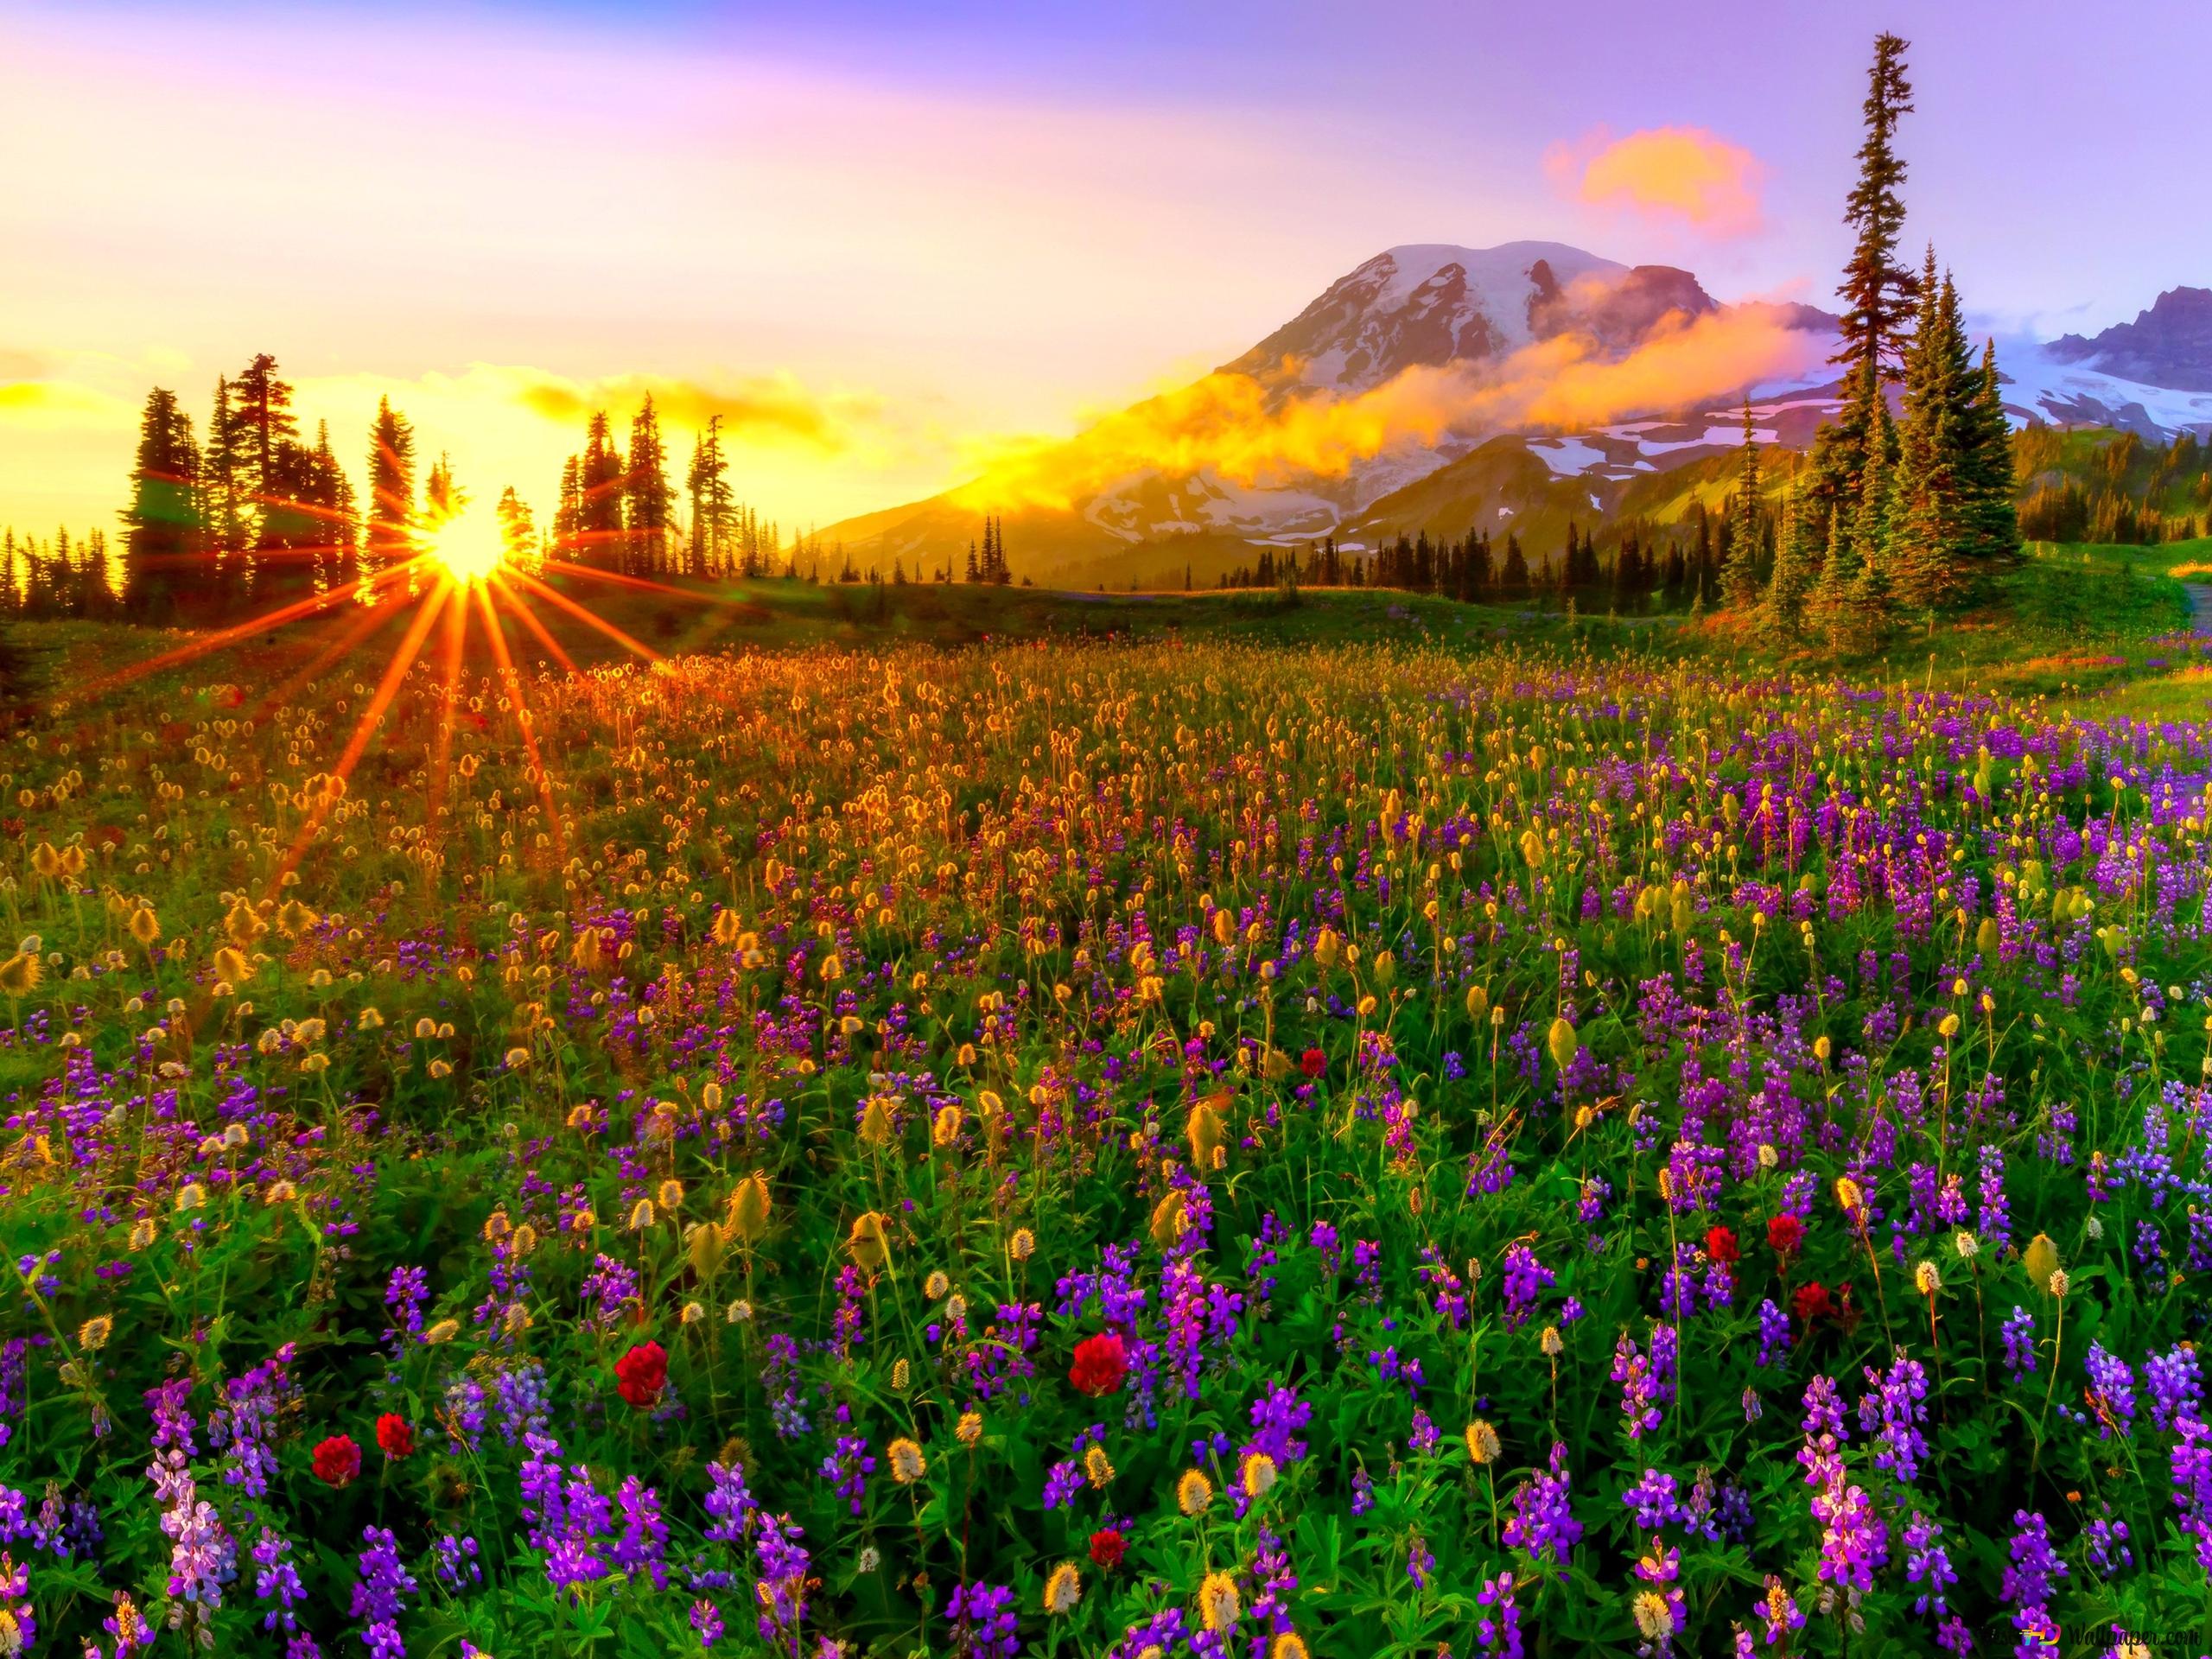 The Arrival of Spring to Nature 2K wallpaper download